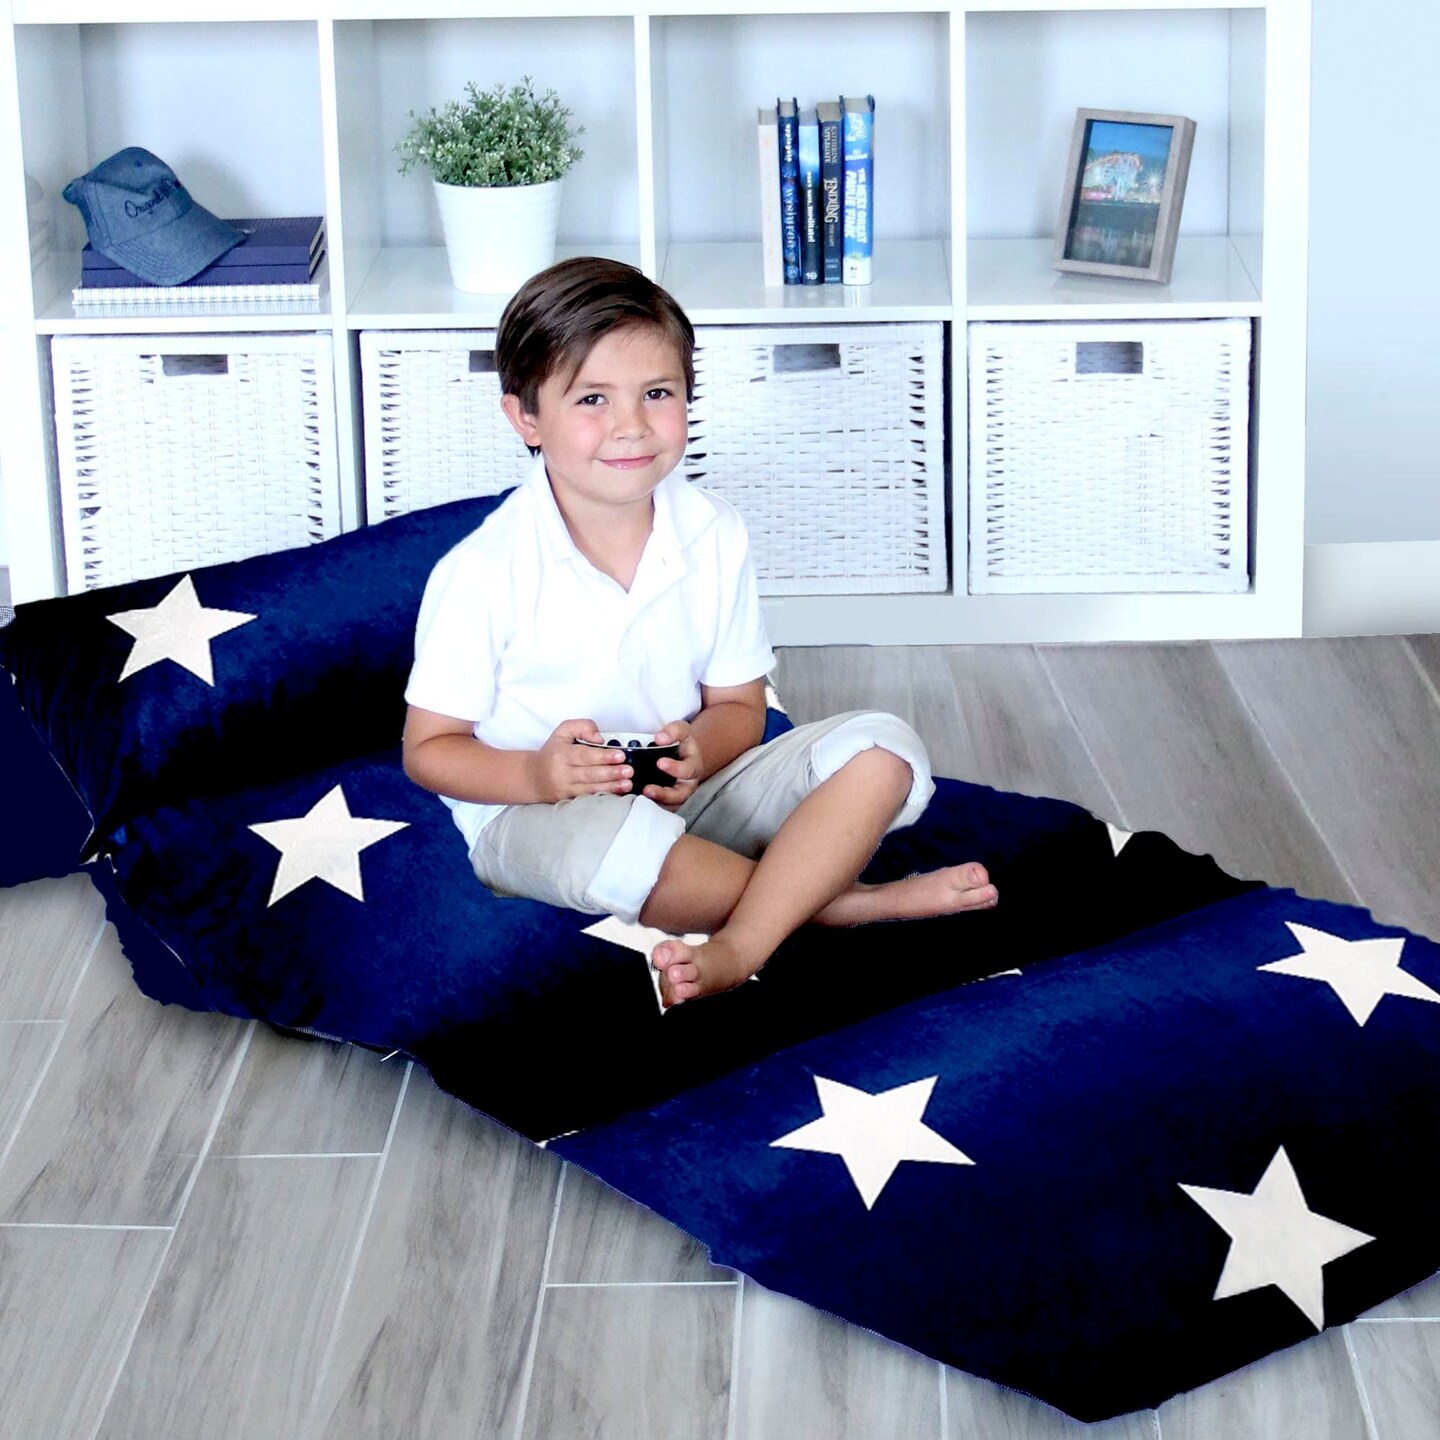 Butterfly Craze Floor Pillow Case, Mattress Bed Lounger Cover, Star Navy, King, Cozy Seating Solution for Kids &#x26; Adults, Recliner Cushion, Perfect for Reading, TV Time, Sleepovers, &#x26; Toddler Nap Mat